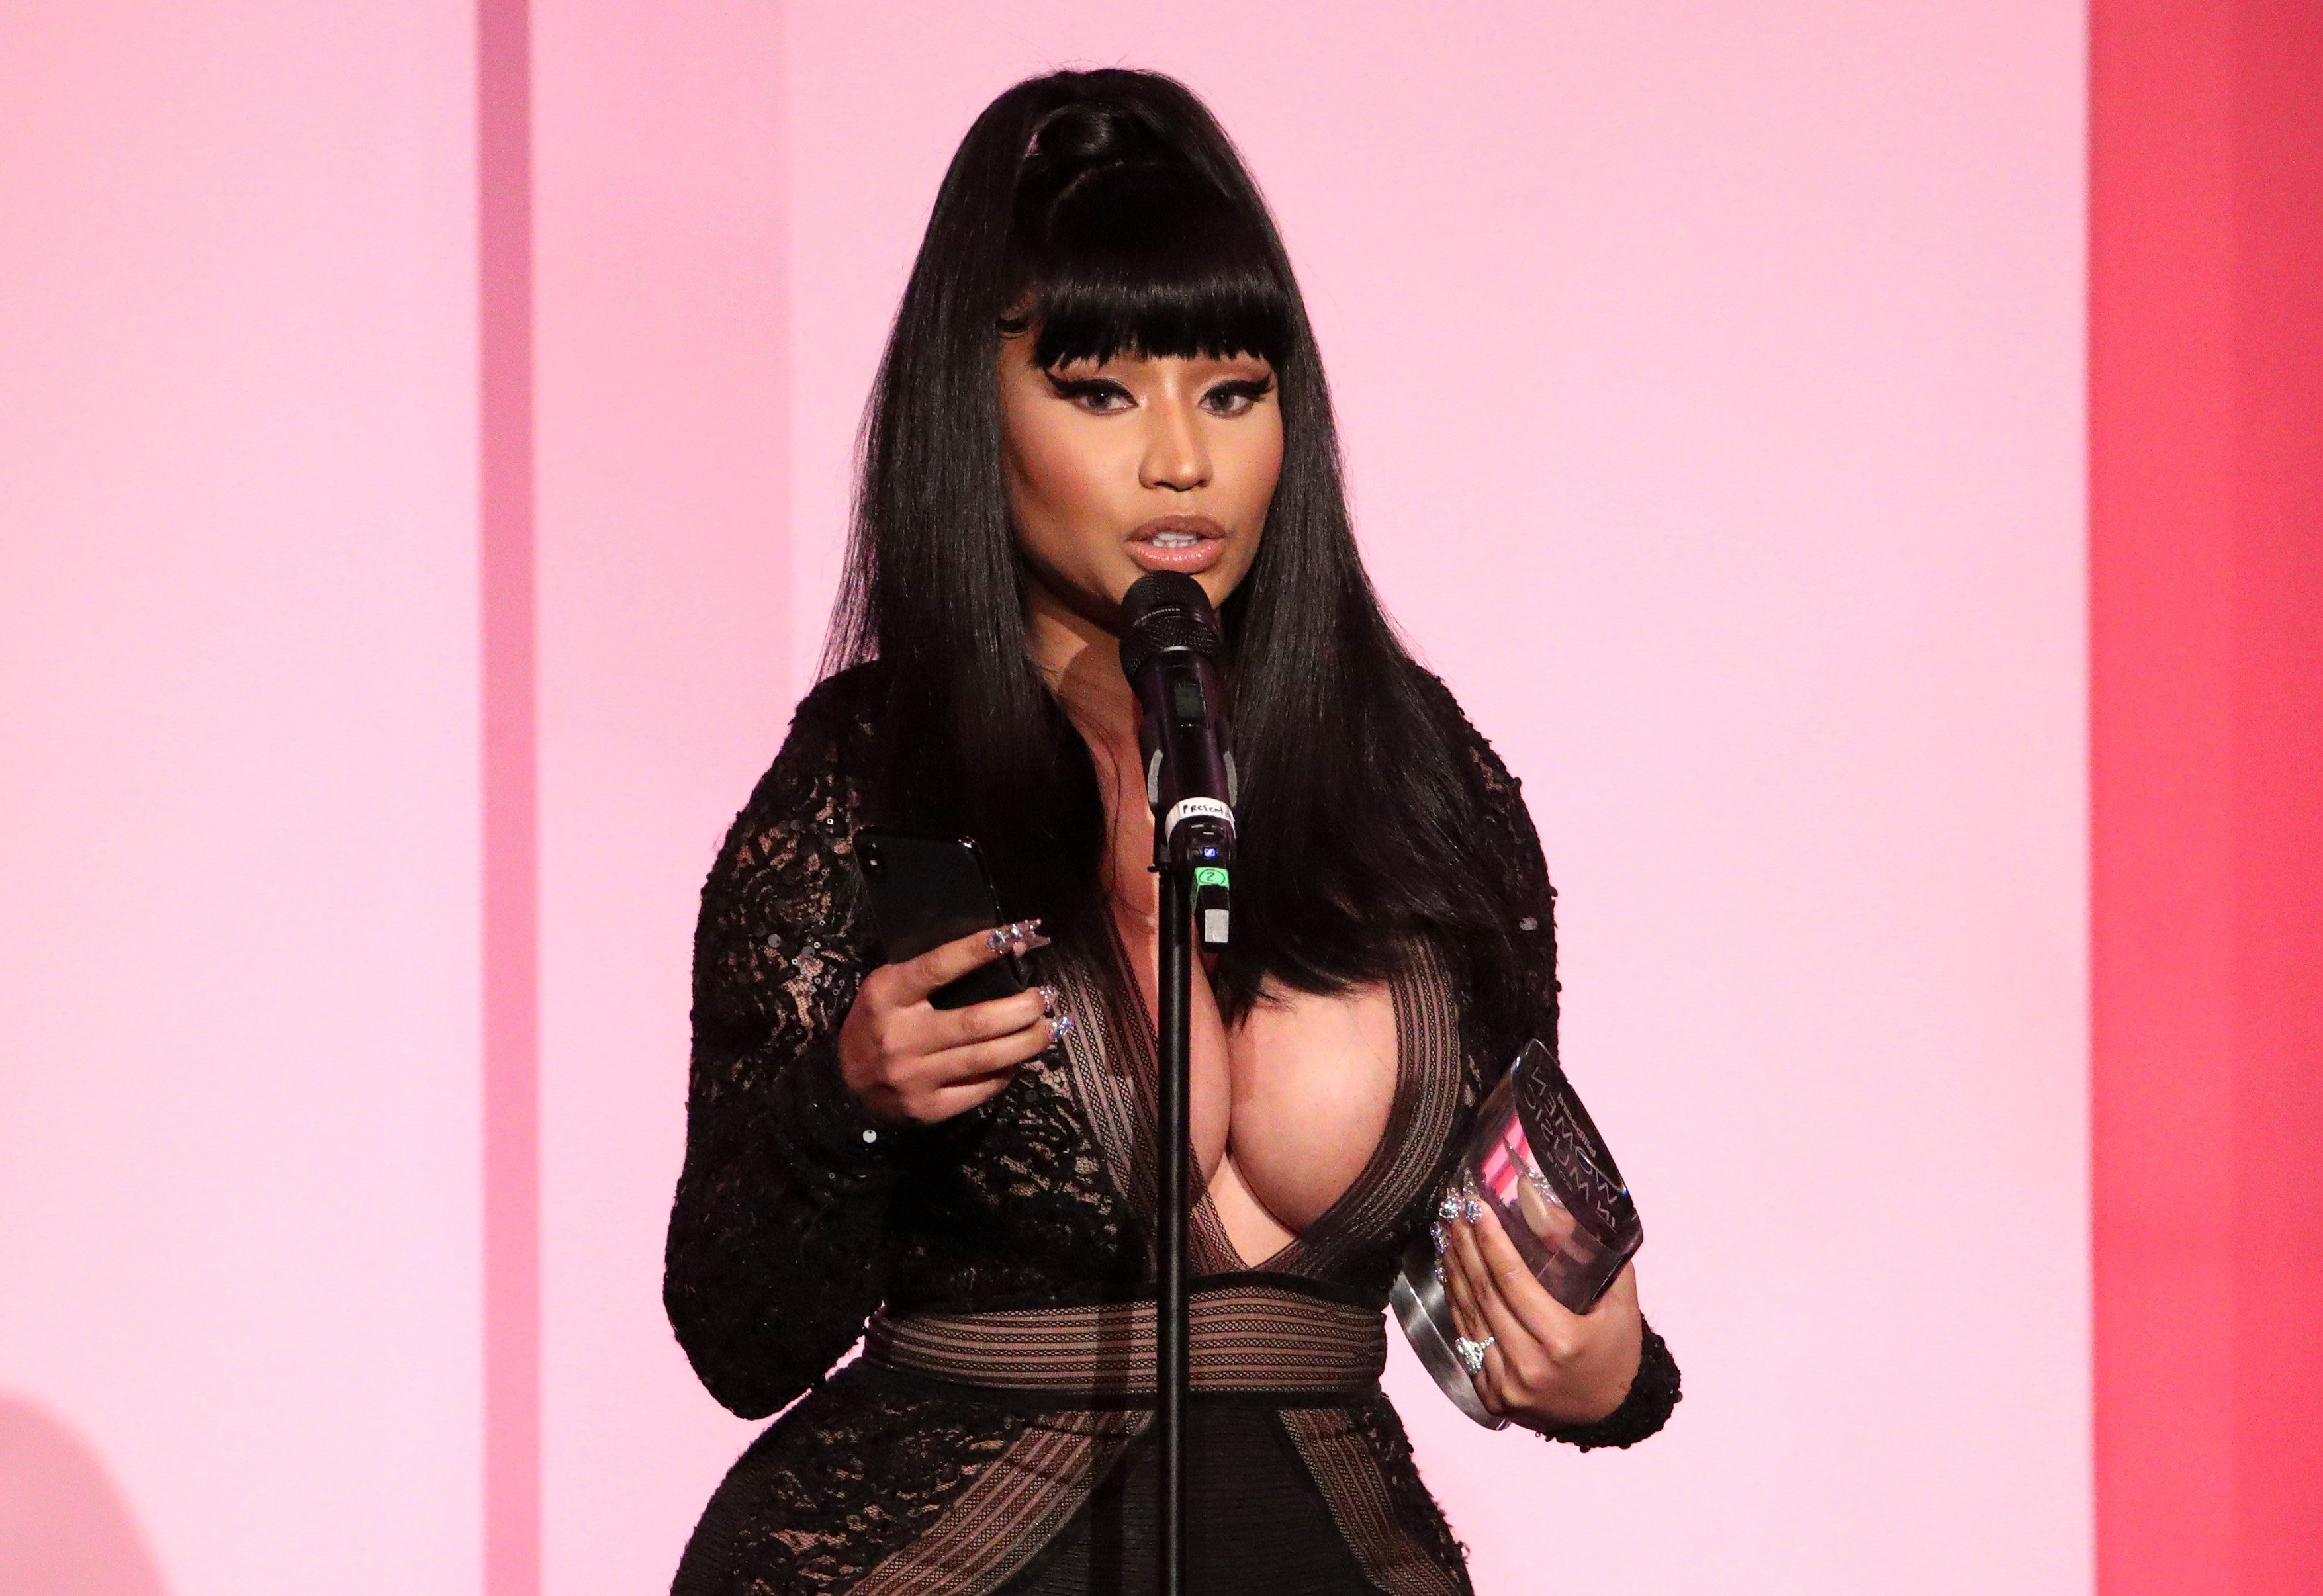 icki Minaj accepts the Gamechanger Award onstage during Billboard Women In Music 2019, presented by YouTube Music, on December 12, 2019 in Los Angeles, California.